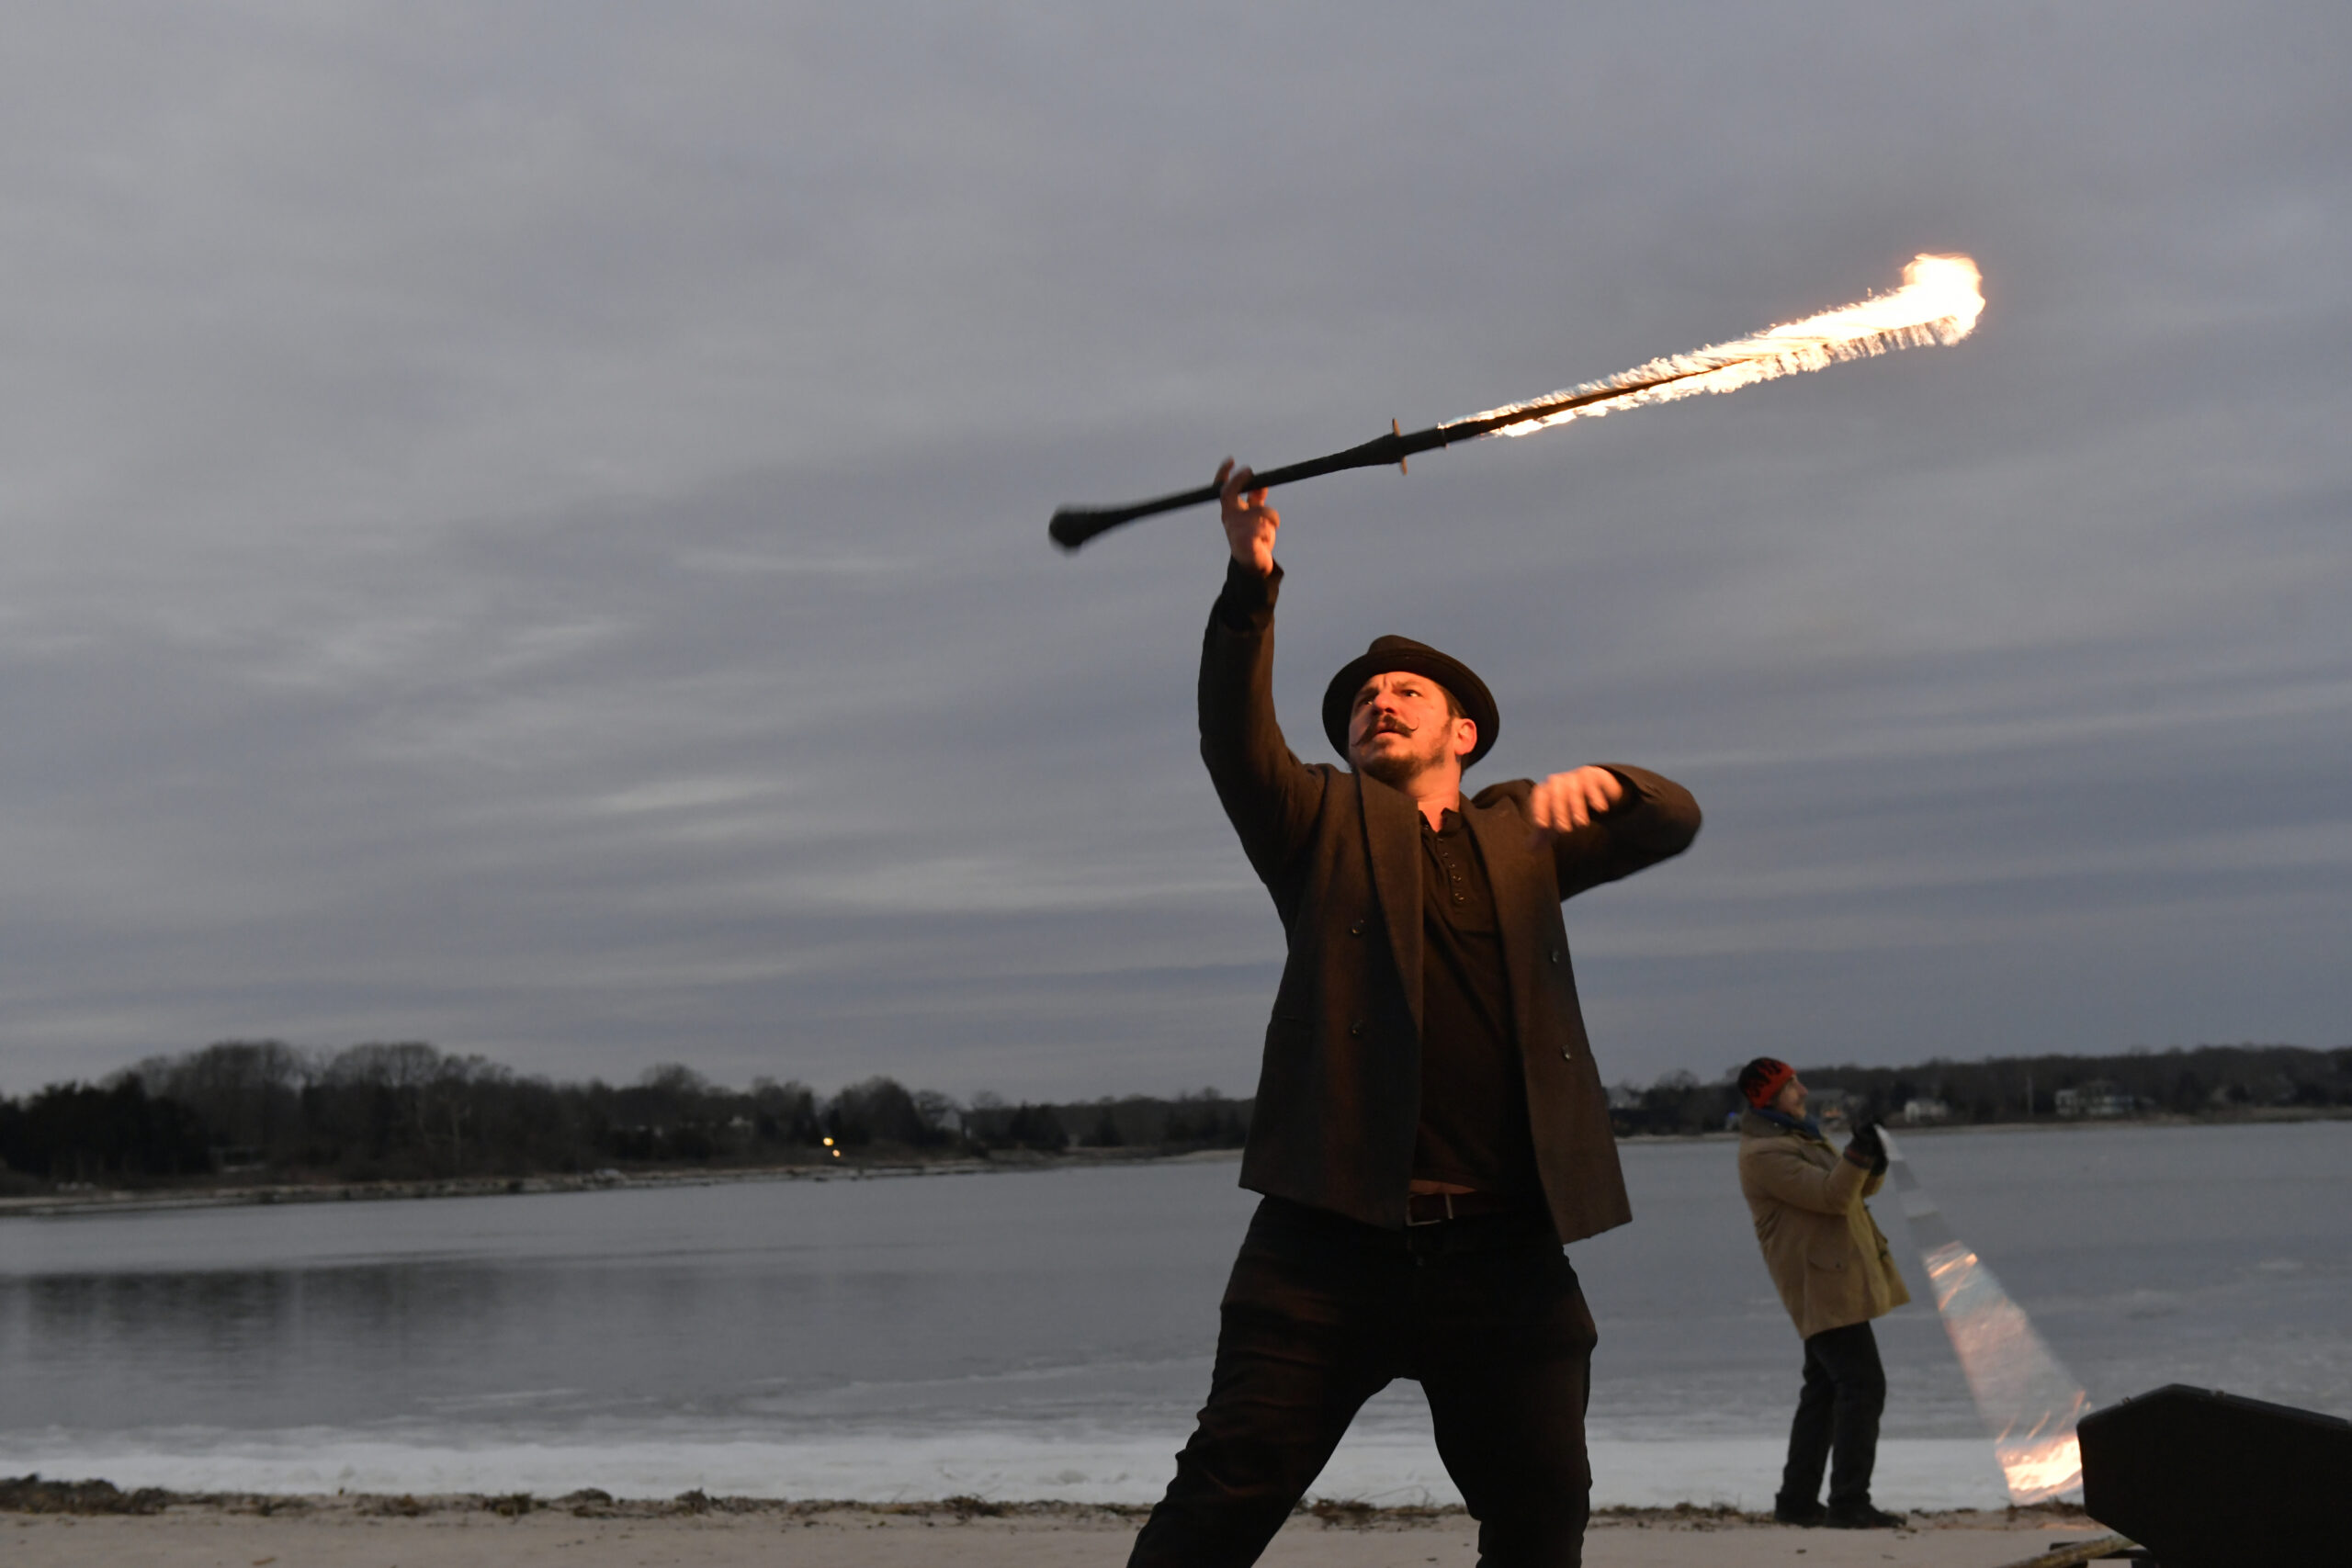 Rob Romeo performs during Fire Dancing by Keith Leaf and His Flaming Friends at Windmill Beach on Saturday evening.   DANA SHAW